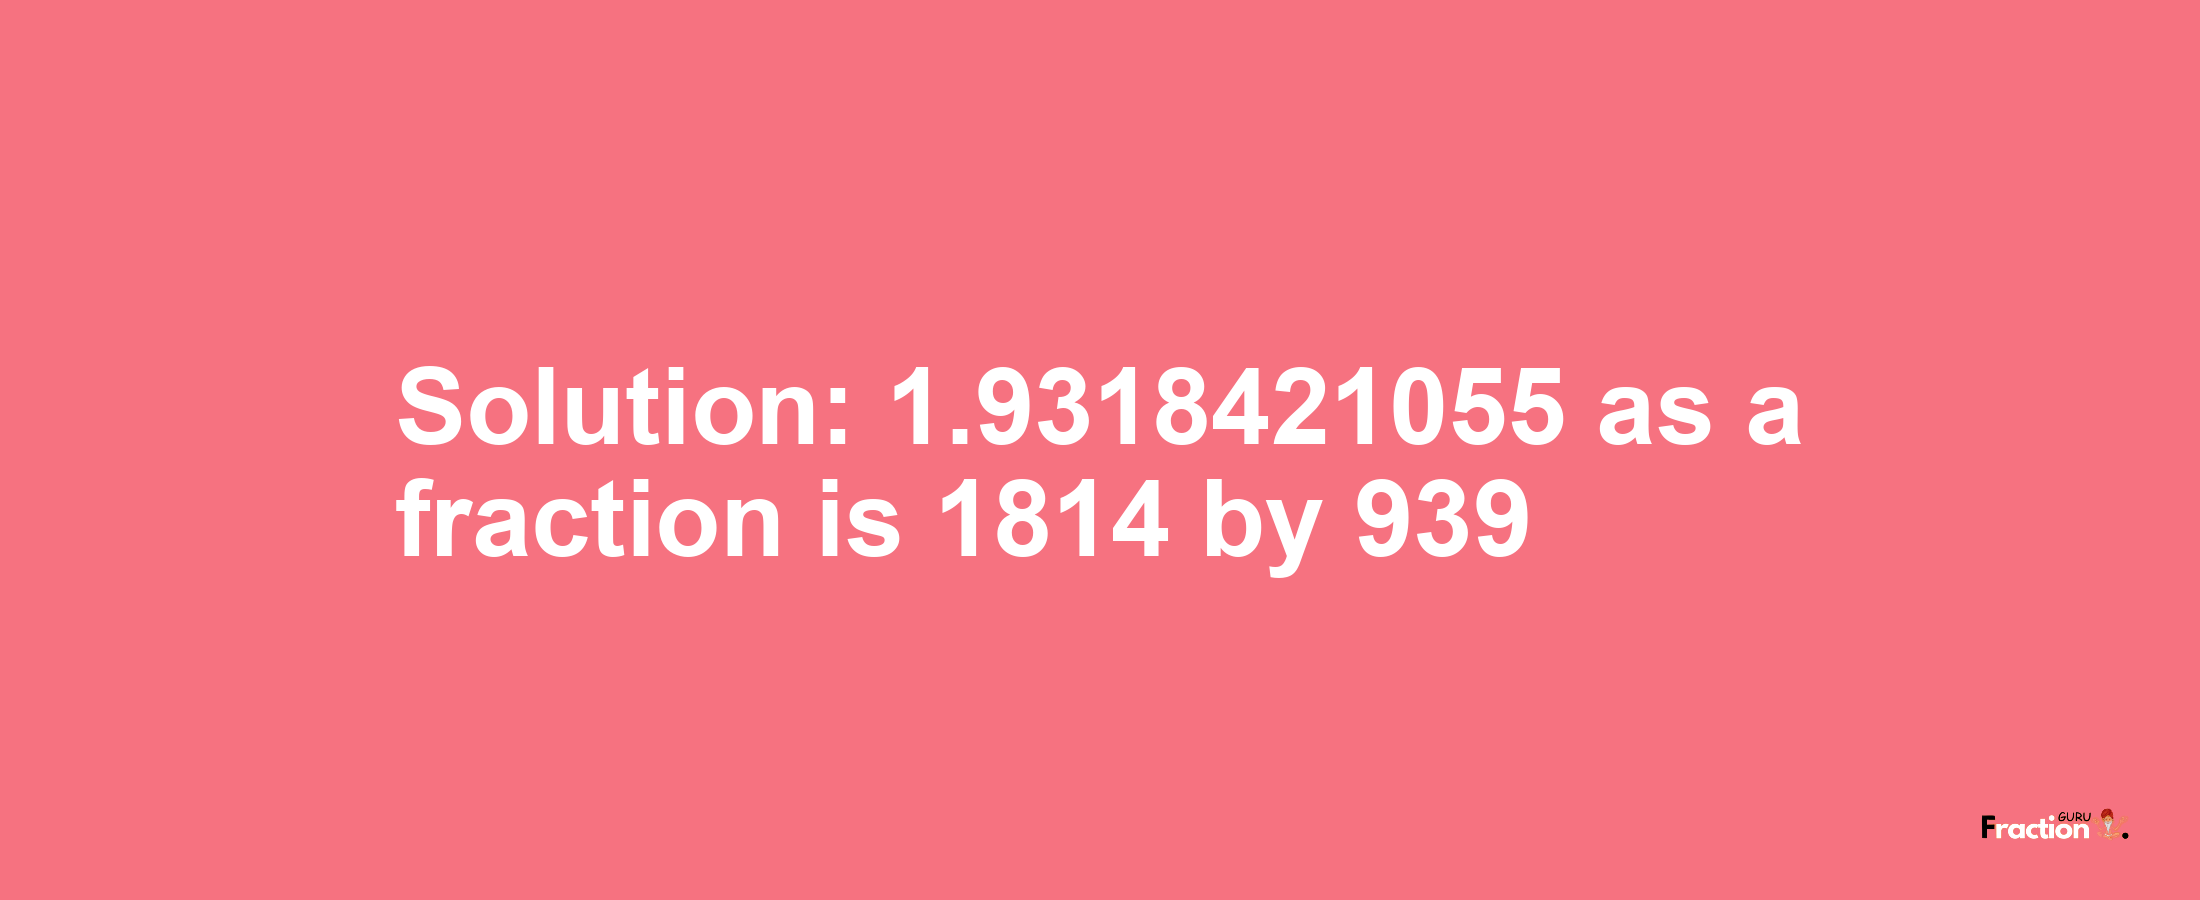 Solution:1.9318421055 as a fraction is 1814/939